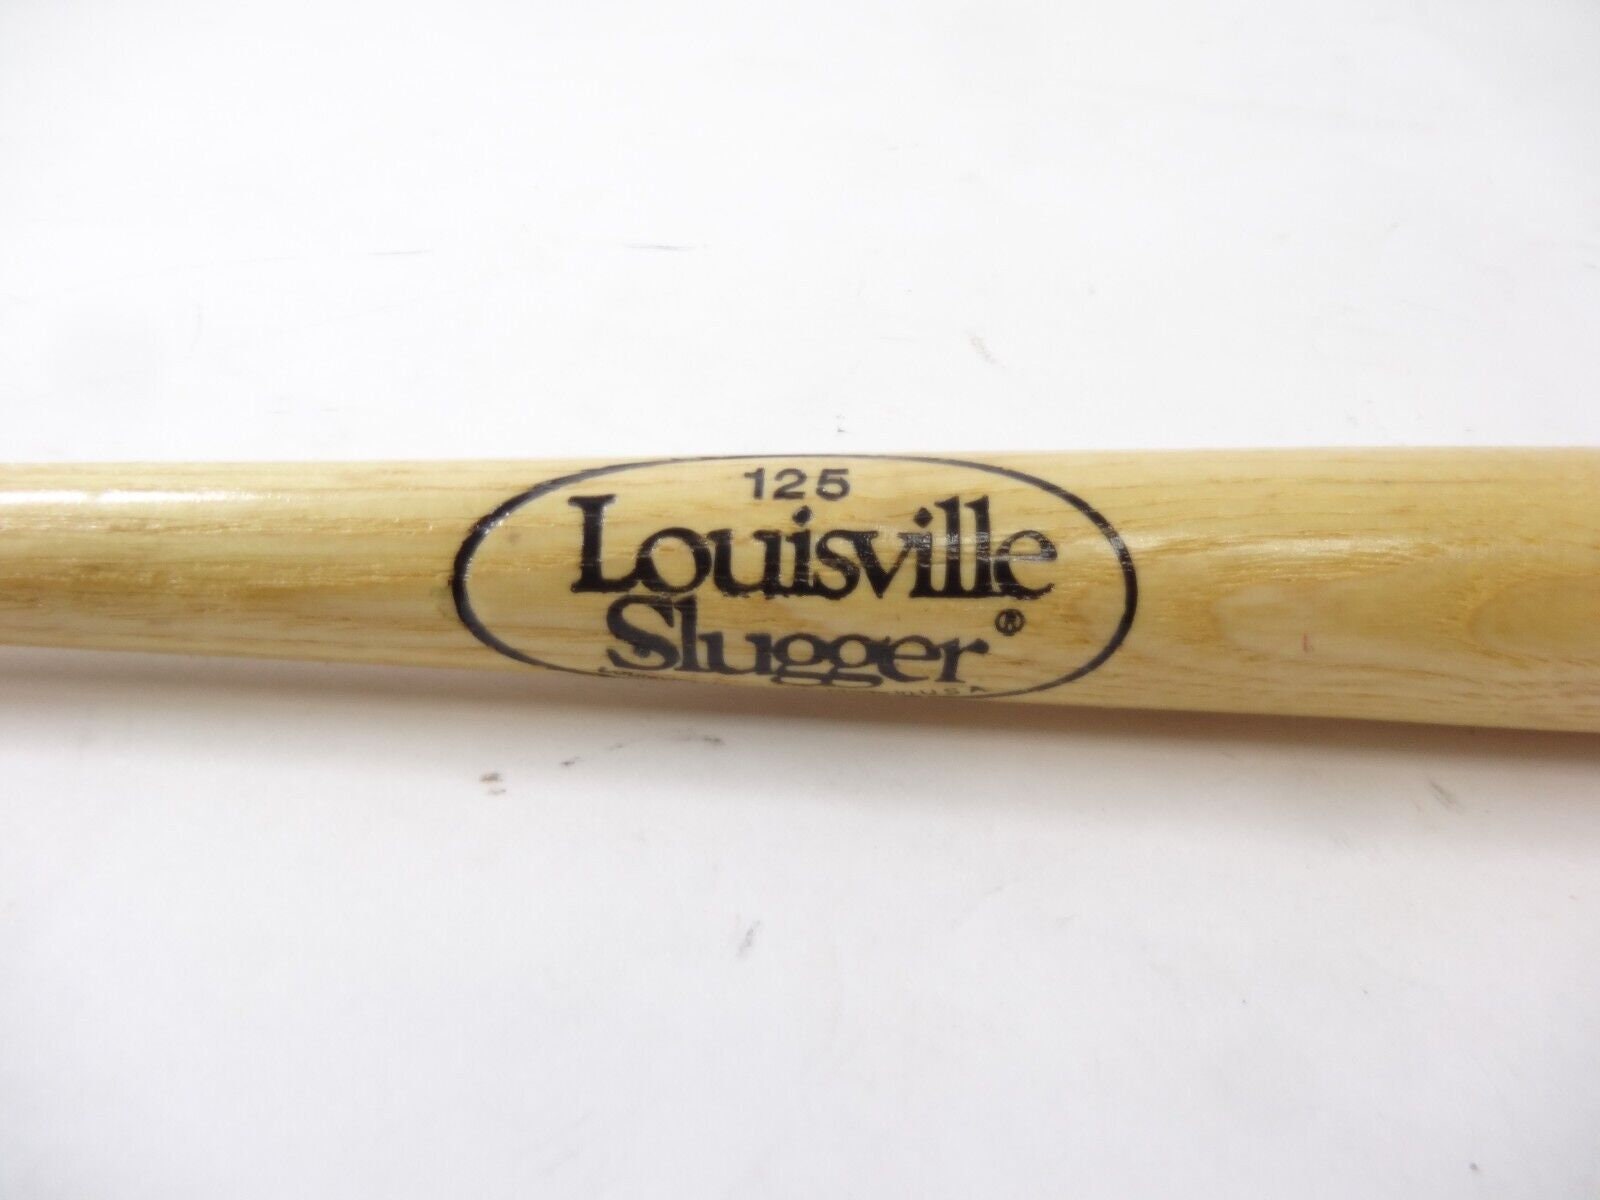 Louisville Slugger - Red Wood Collection Shirt